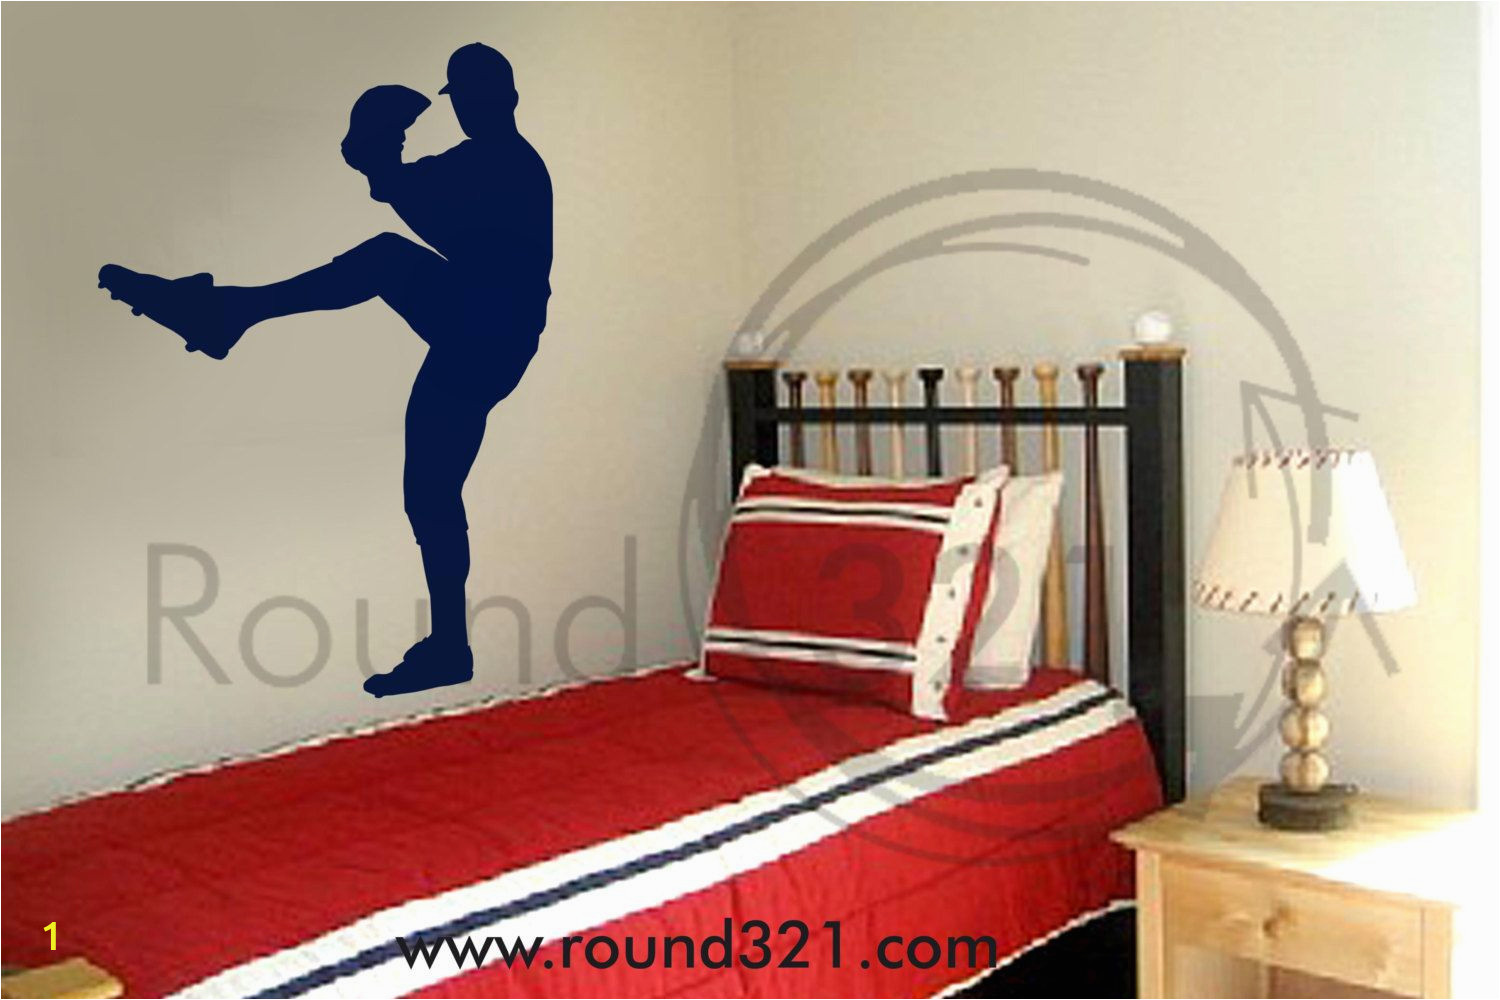 Large Baseball Wall Murals Large Sized Baseball Pitcher Wall Decal with Children S